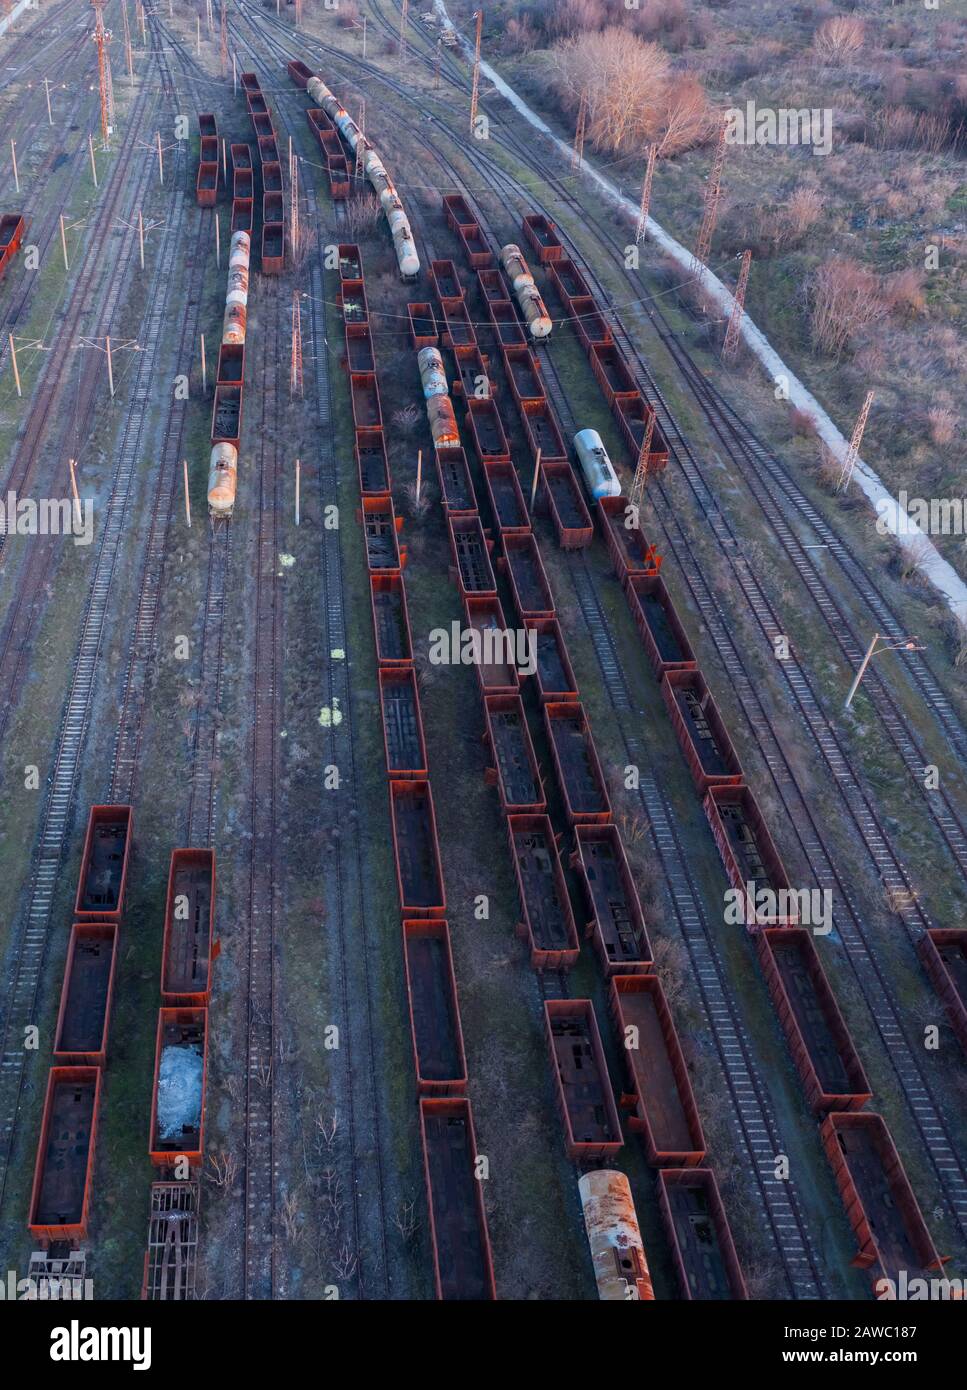 Freight trains on the railway station Stock Photo